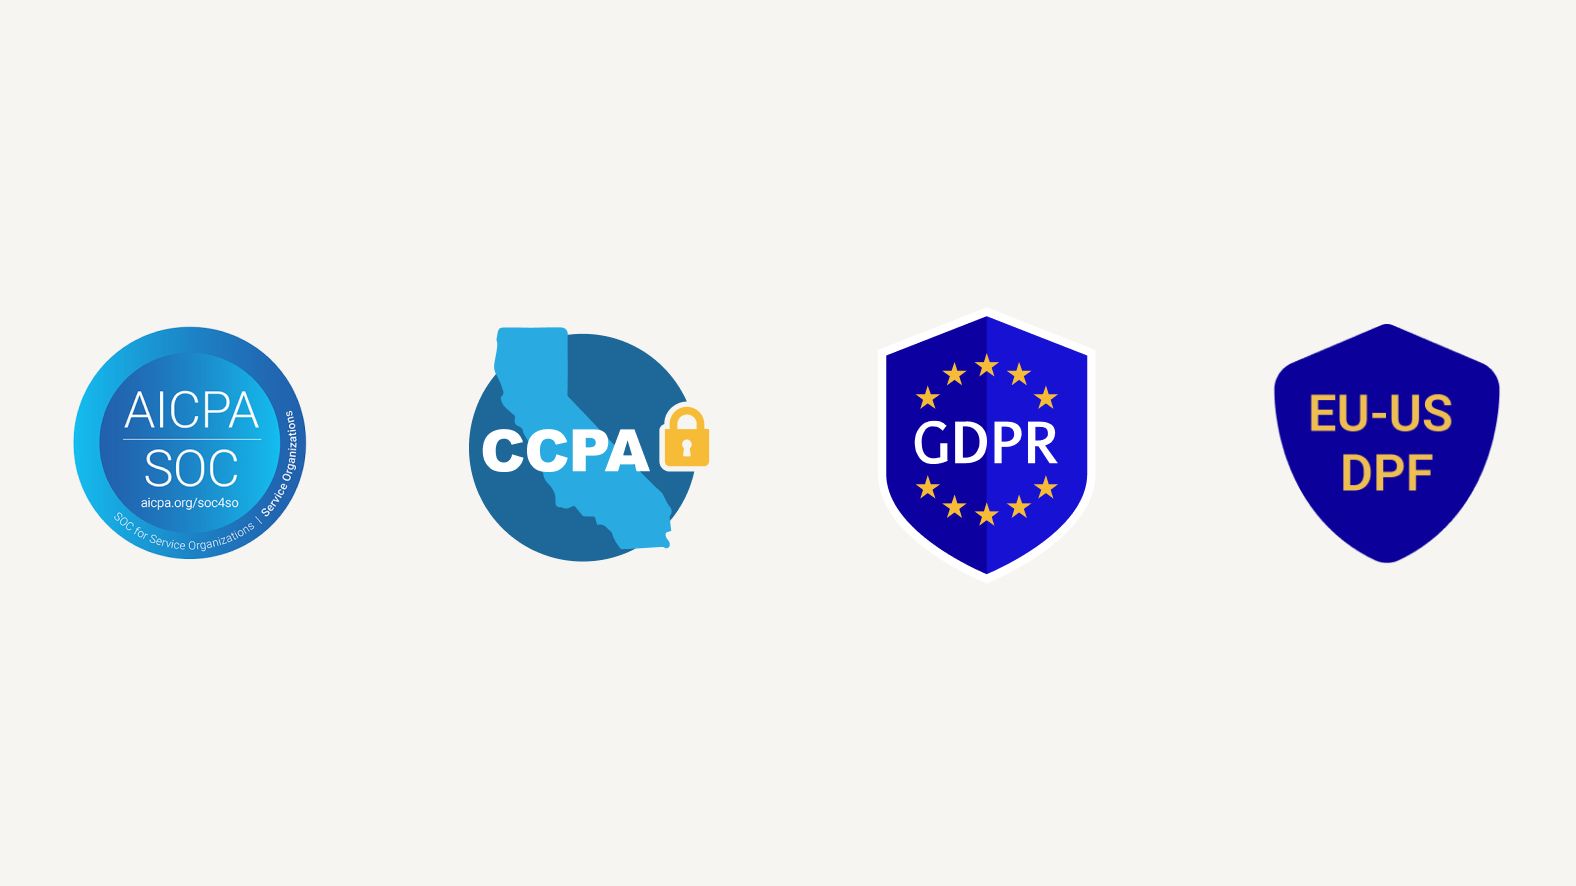 Dropbox is committed to safeguarding the security and privacy of our users' data. In alignment with that commitment, we have taken steps to ensure Dropbox's compliance with the CCPA, EU-US DPF, GDPR and SOC 2.